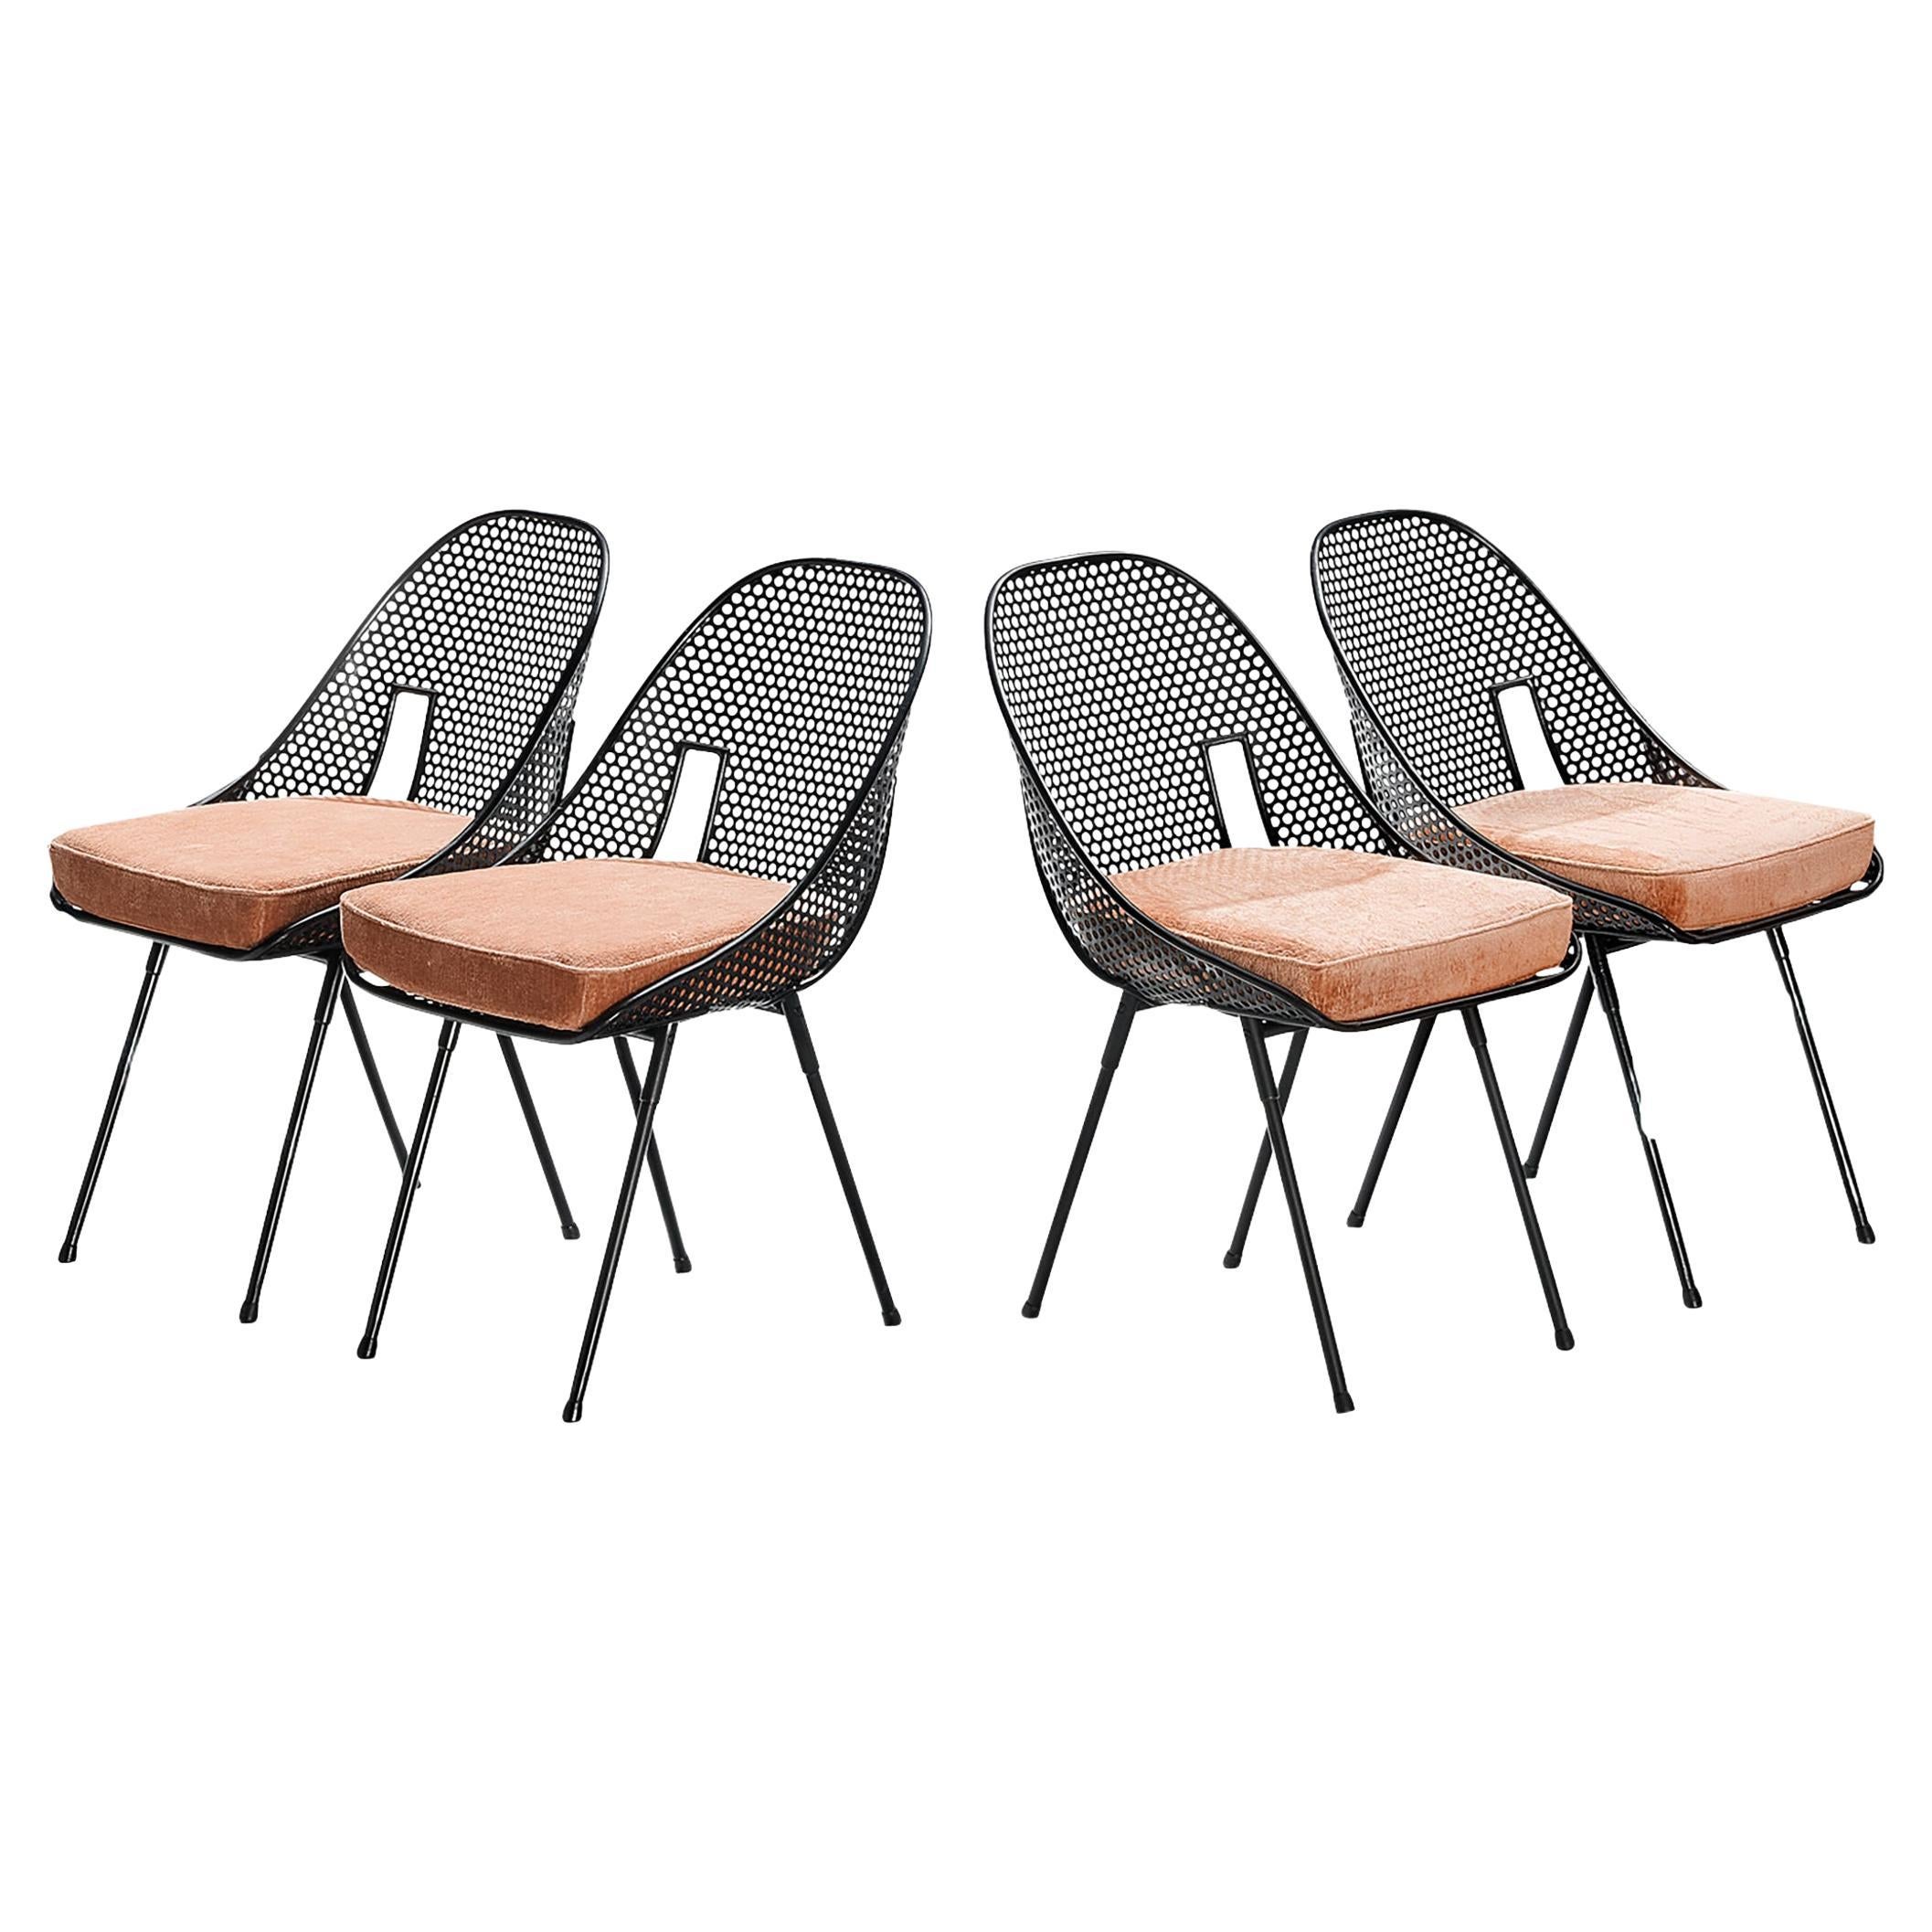 Rare Giuseppe De Vivo Set of Four Dining Chairs in Black Perforated Metal  For Sale